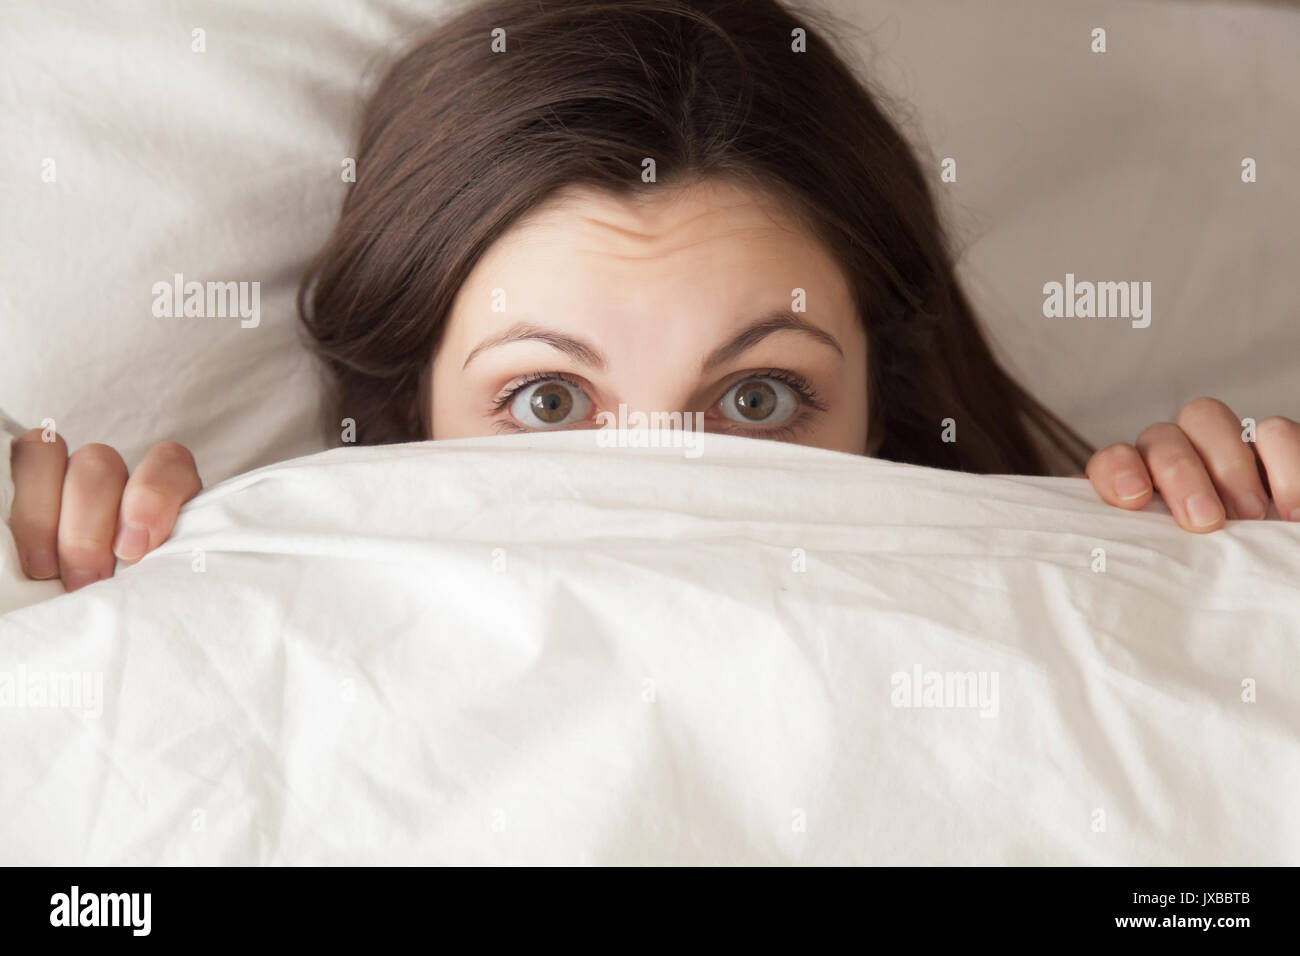 Funny surprised girl covering face with white blanket, headshot  Stock Photo